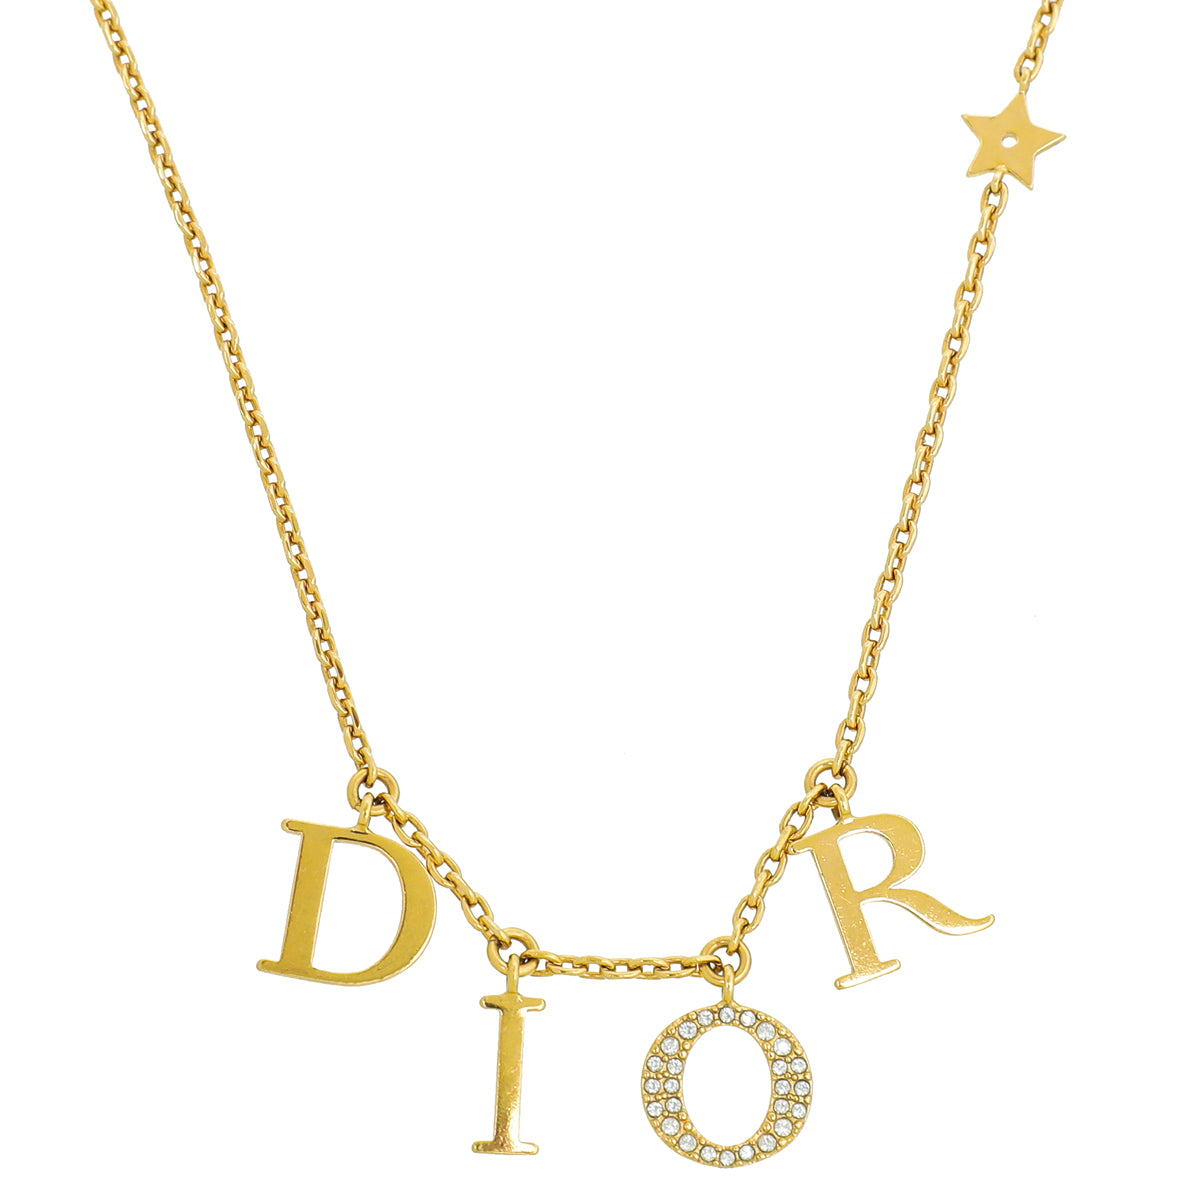 Miss Dior Necklace GoldFinish Metal with White Resin Pearls and  SilverTone Crystals  DIOR SI